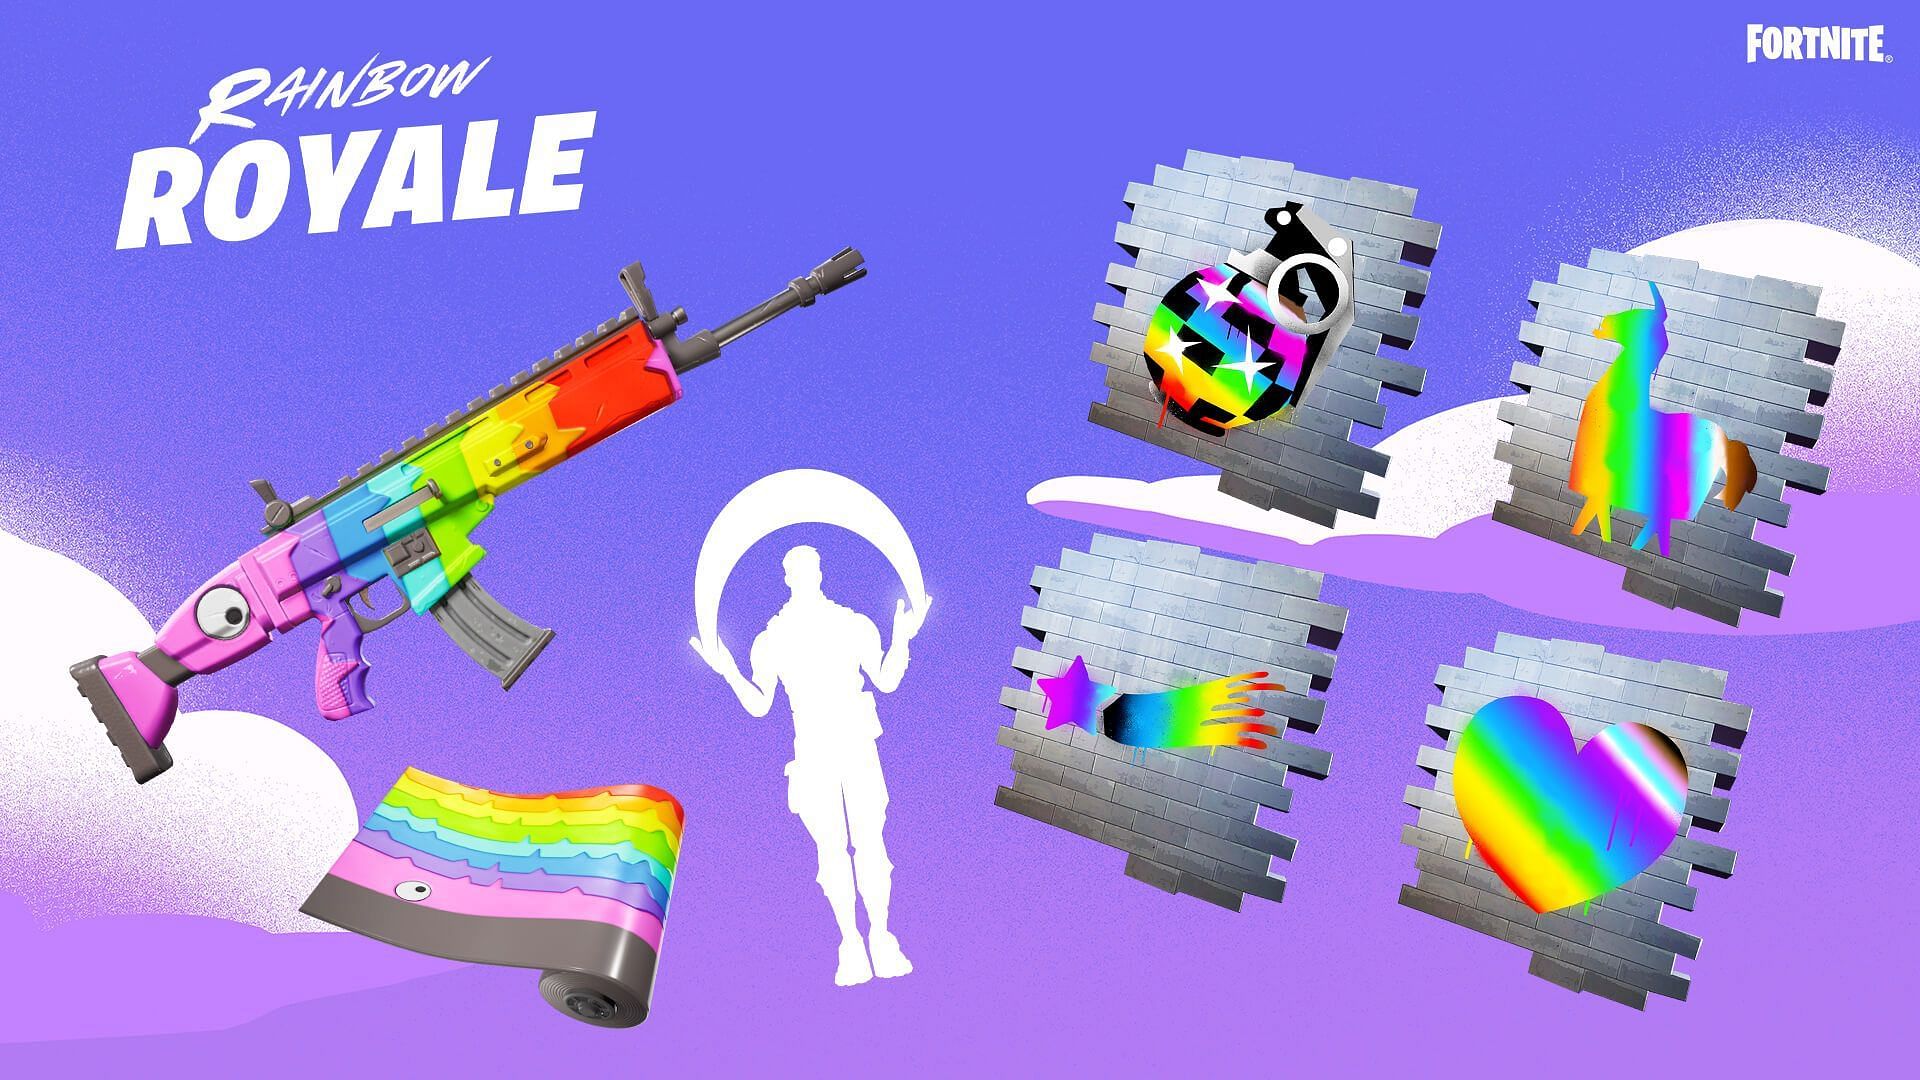 Free Fortnite cosmetics are available for a limited time (Image via Epic Games)